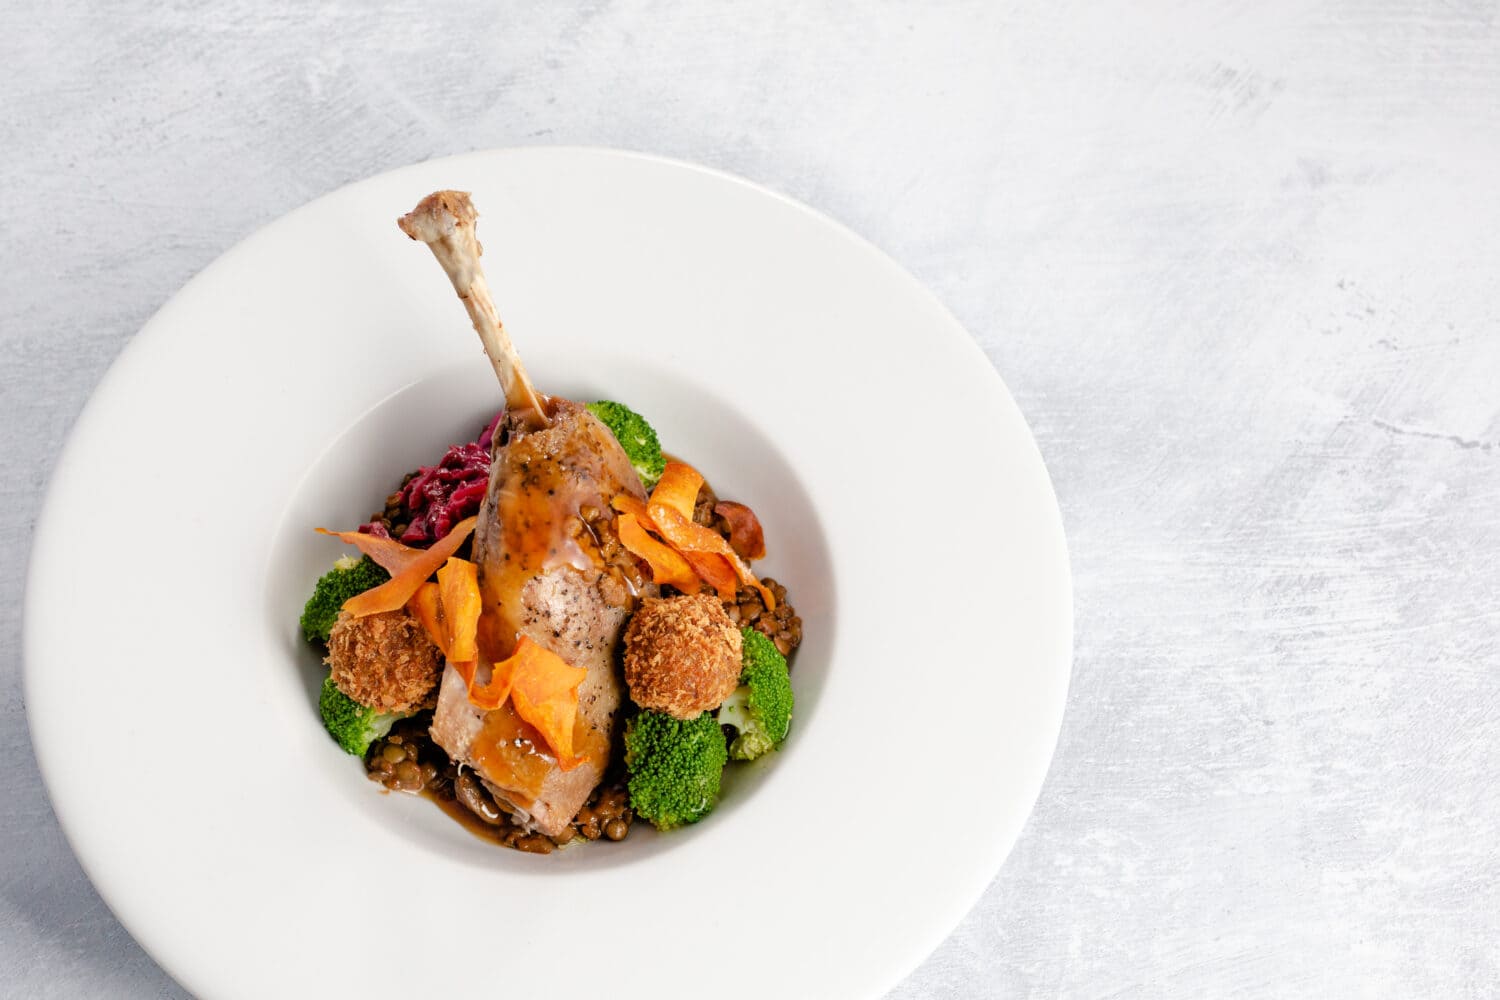 Slow cooked duck leg – duck and sloe gin bon bon, braised red cabbage, broccoli and a rich lentil cassoulet